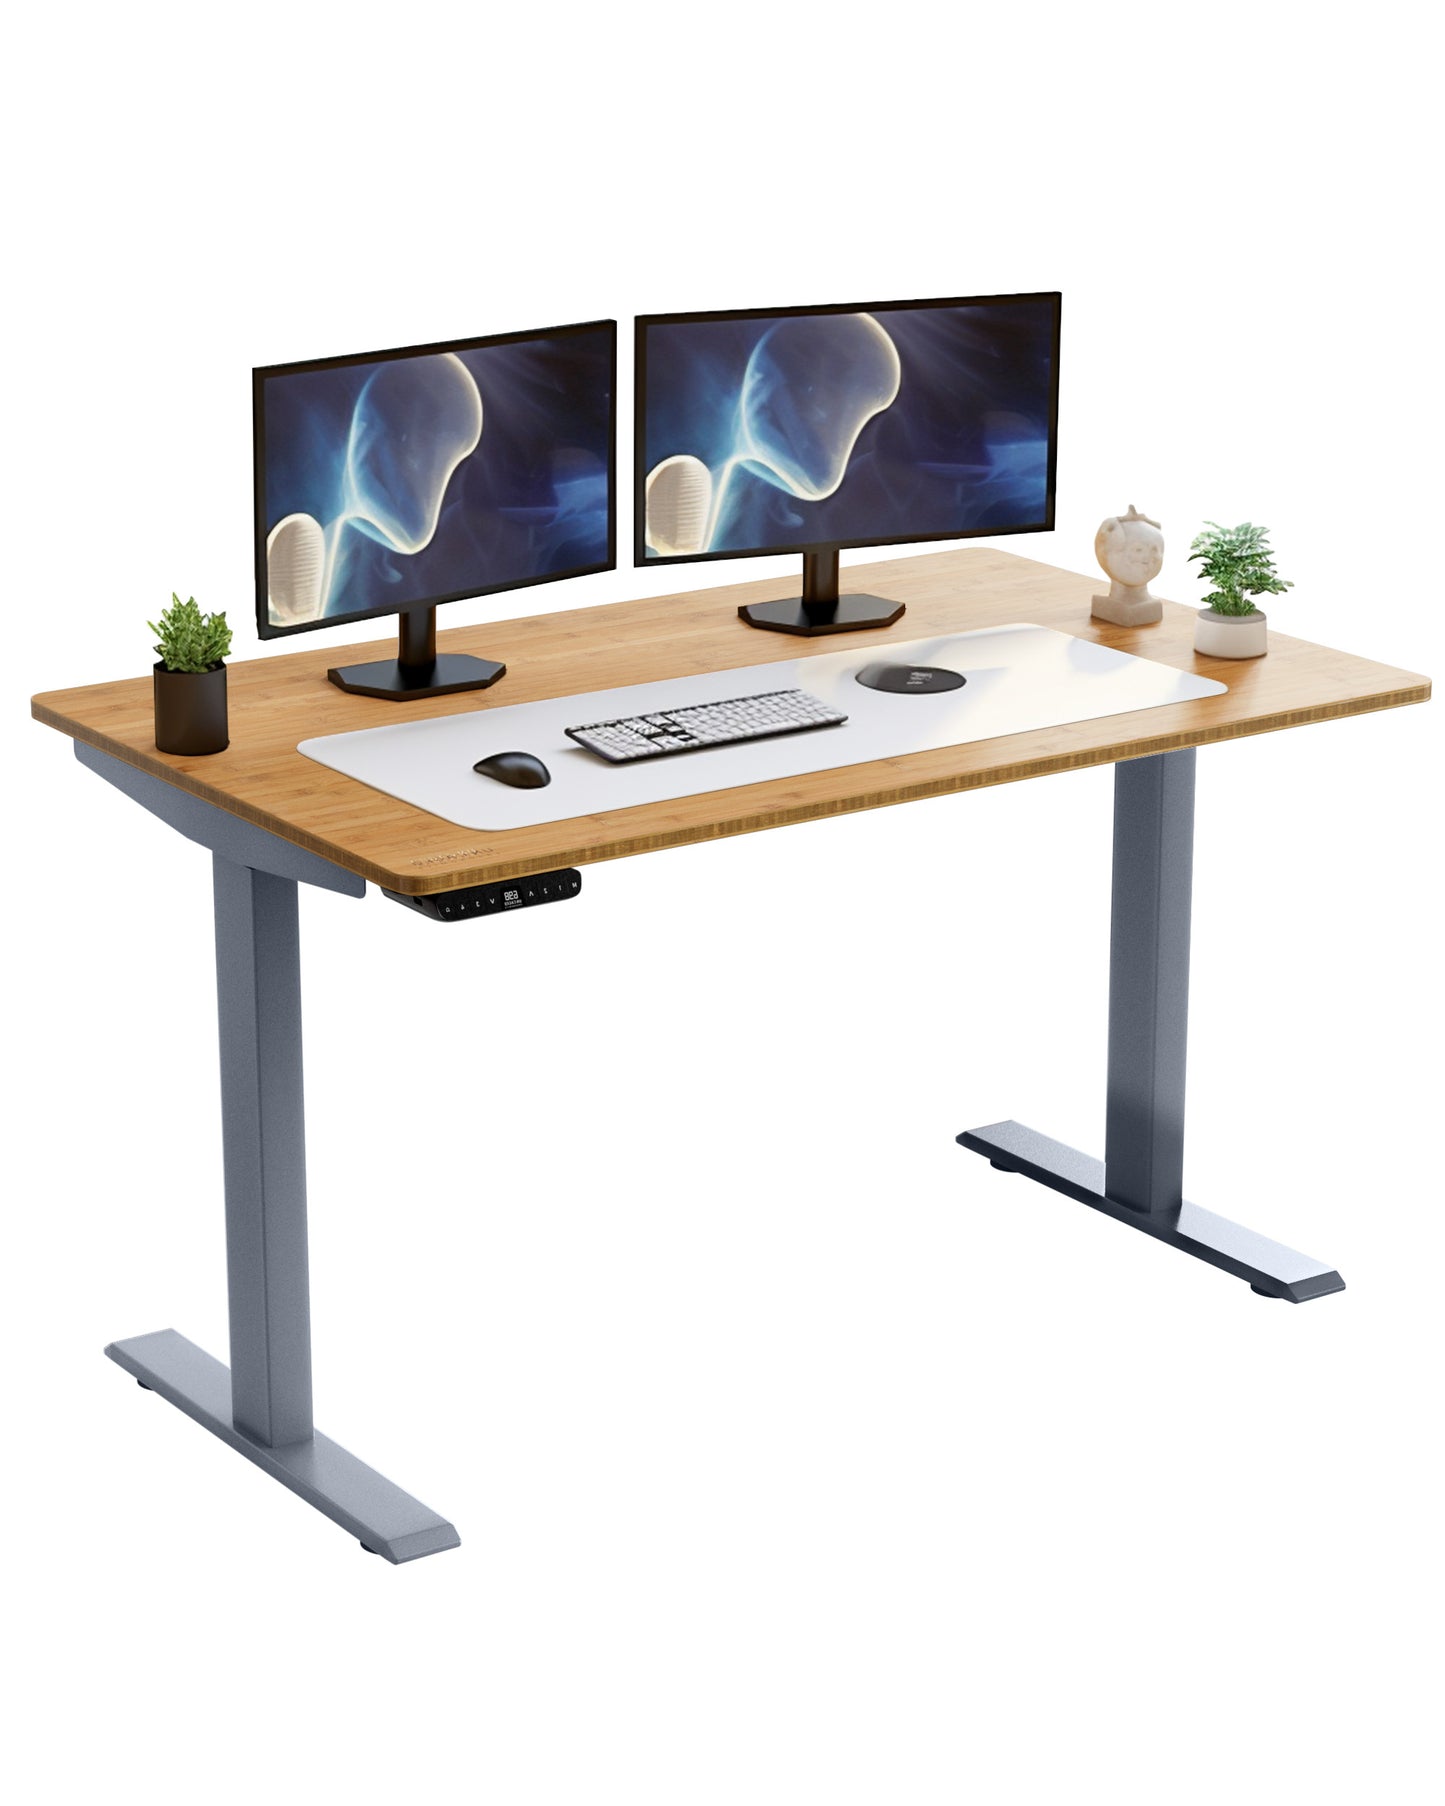 Gray and Natural Bamboo Dual Motor Electric Office Adjustable Computer Desk